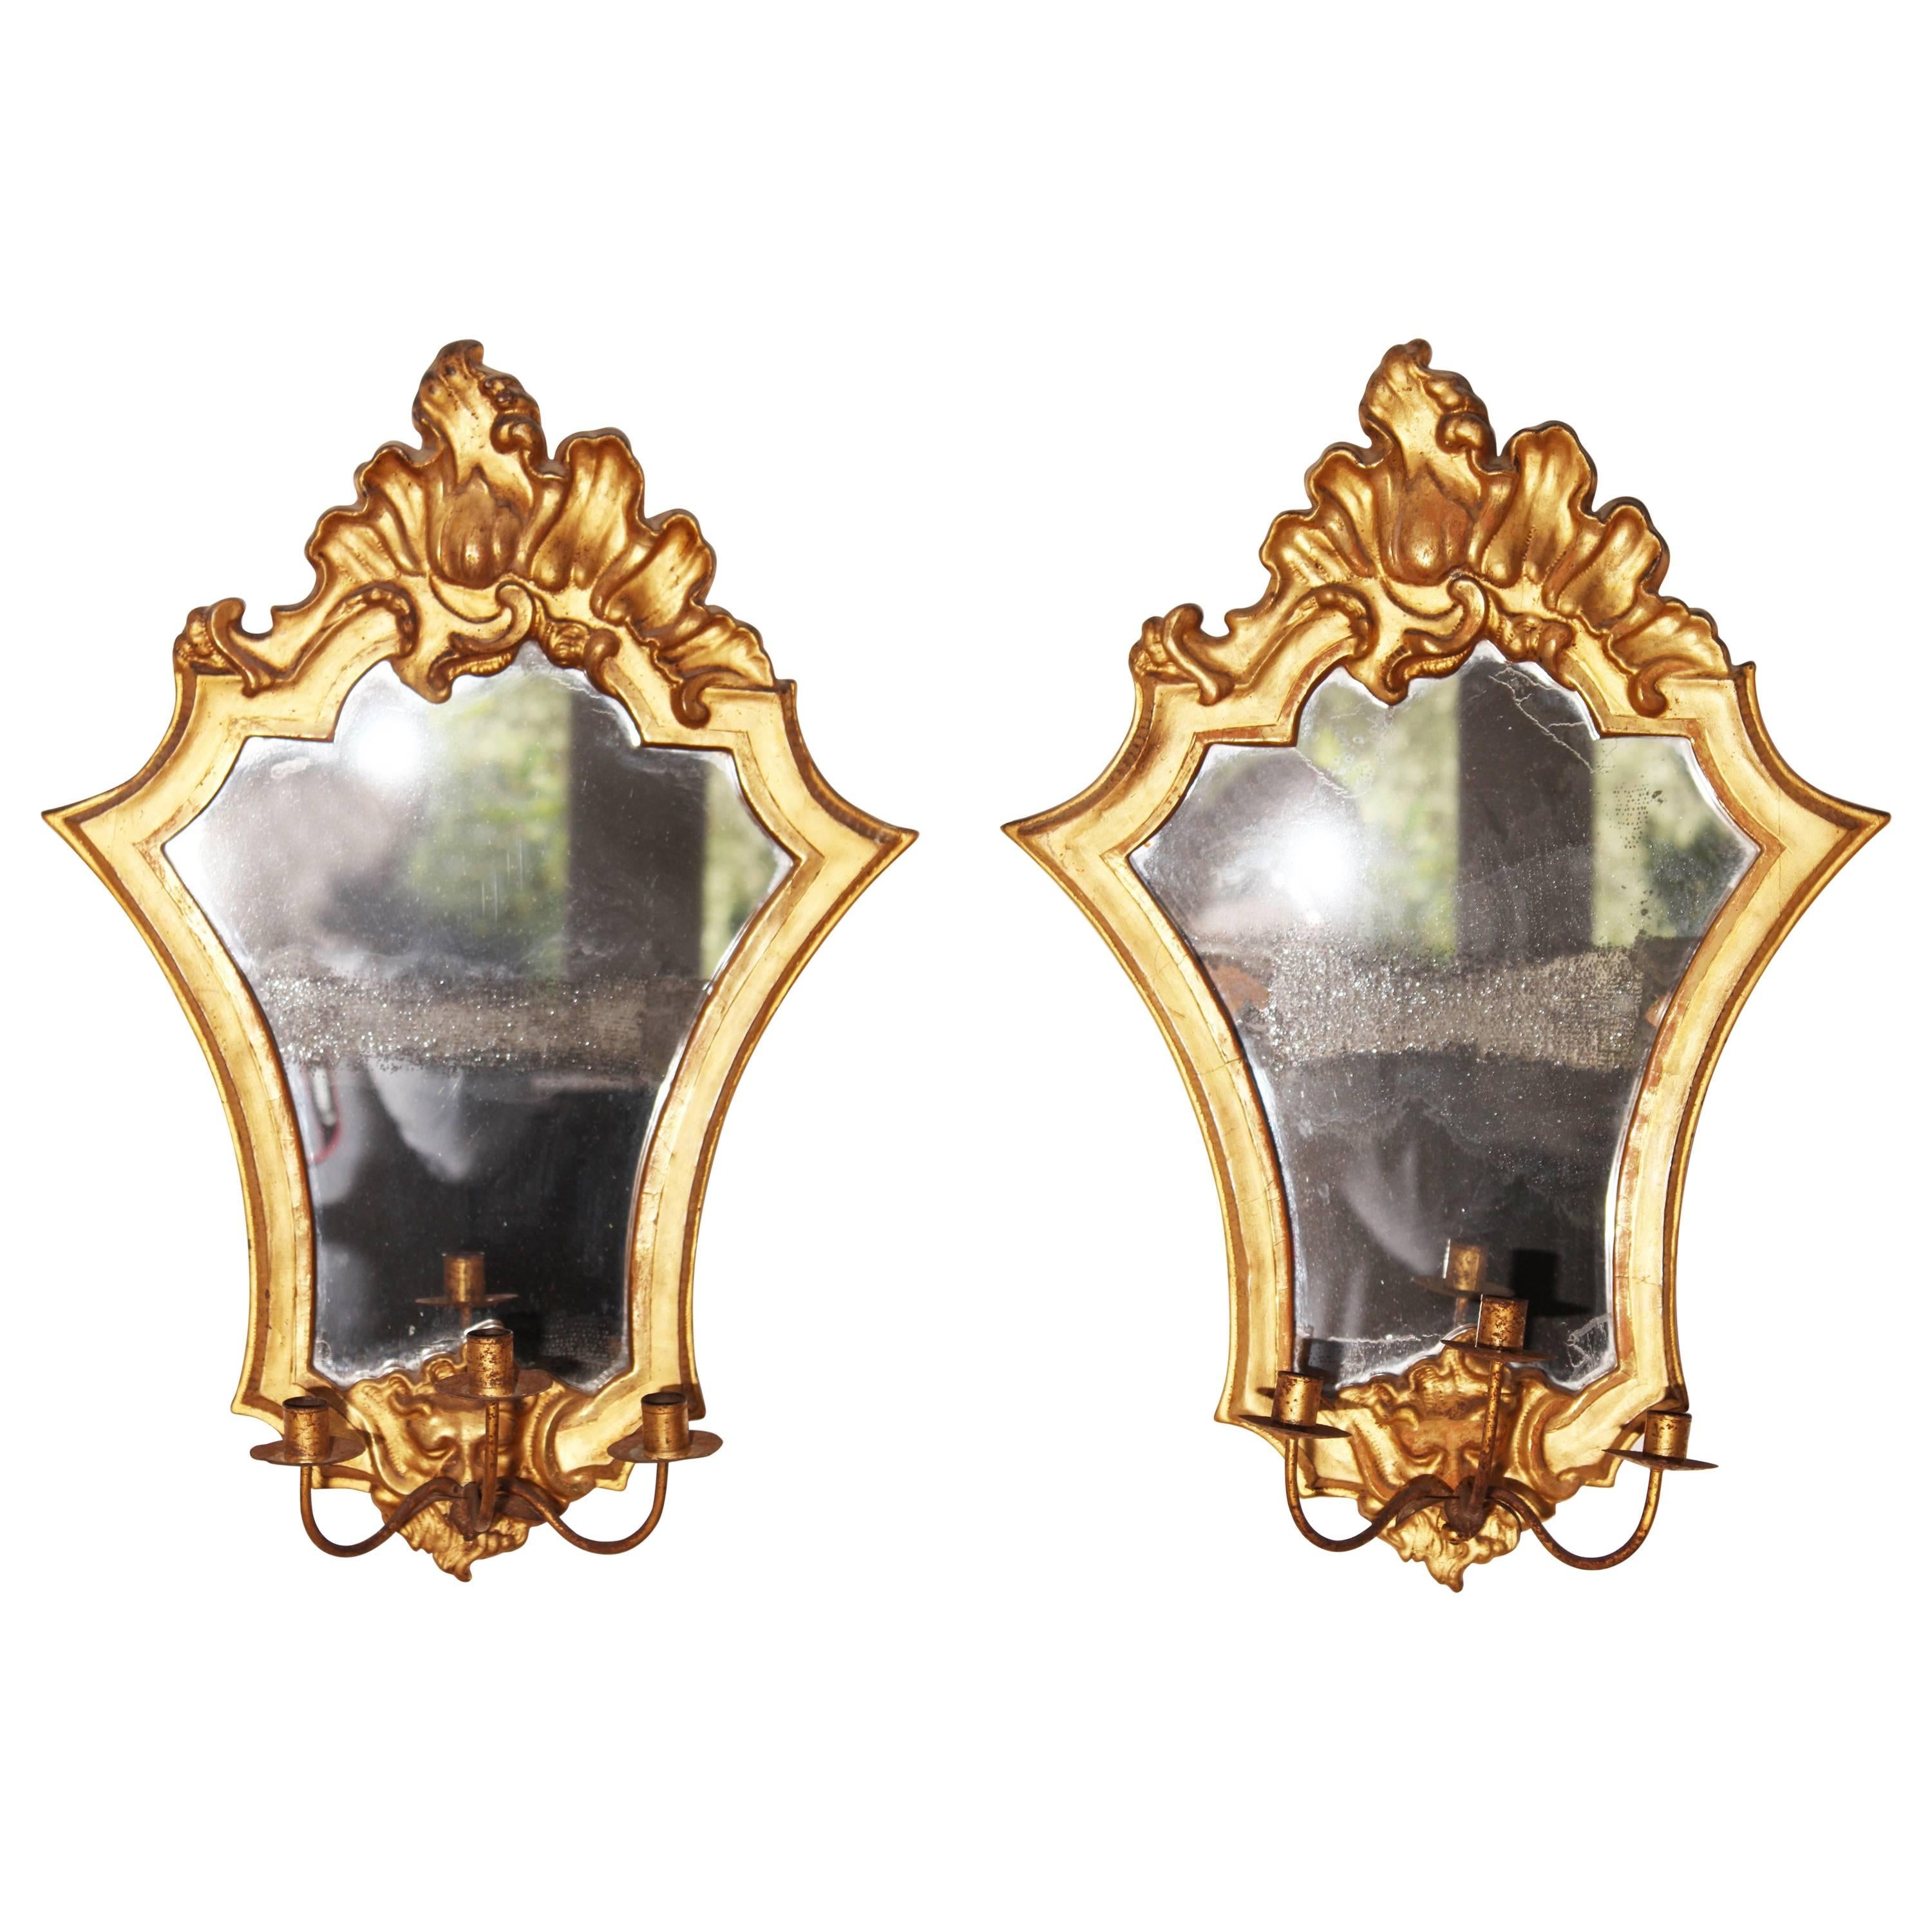 1700s, Pair of Gold Giltwood Wall Mirrors and Sconces